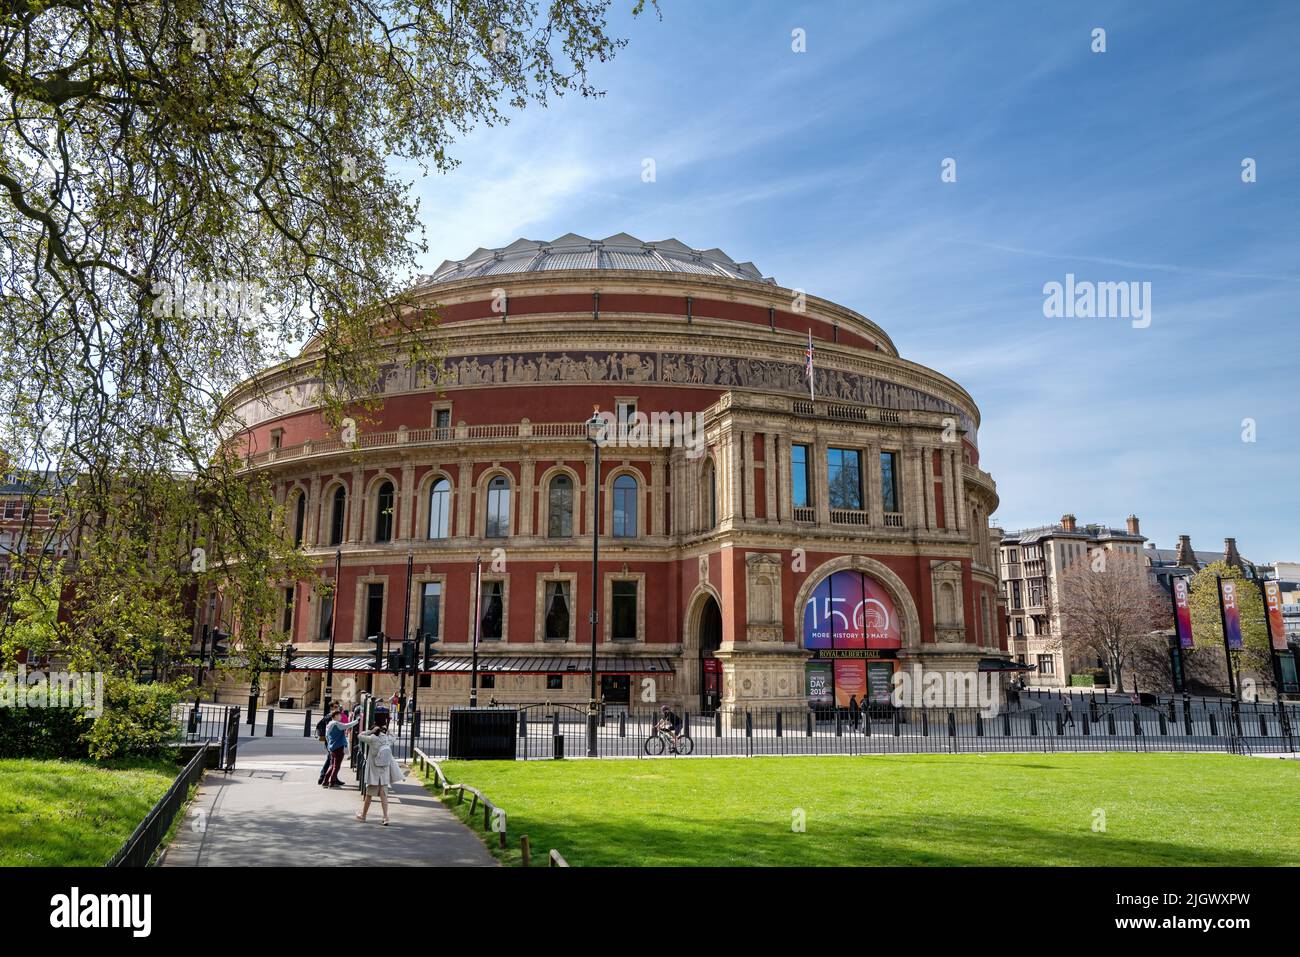 London, UK - 17 April 2022: Daytime view of the Royal Albert Hall, London. Opened by Queen Victoria in 1871 as a tribute to Prince Albert. The world f Stock Photo